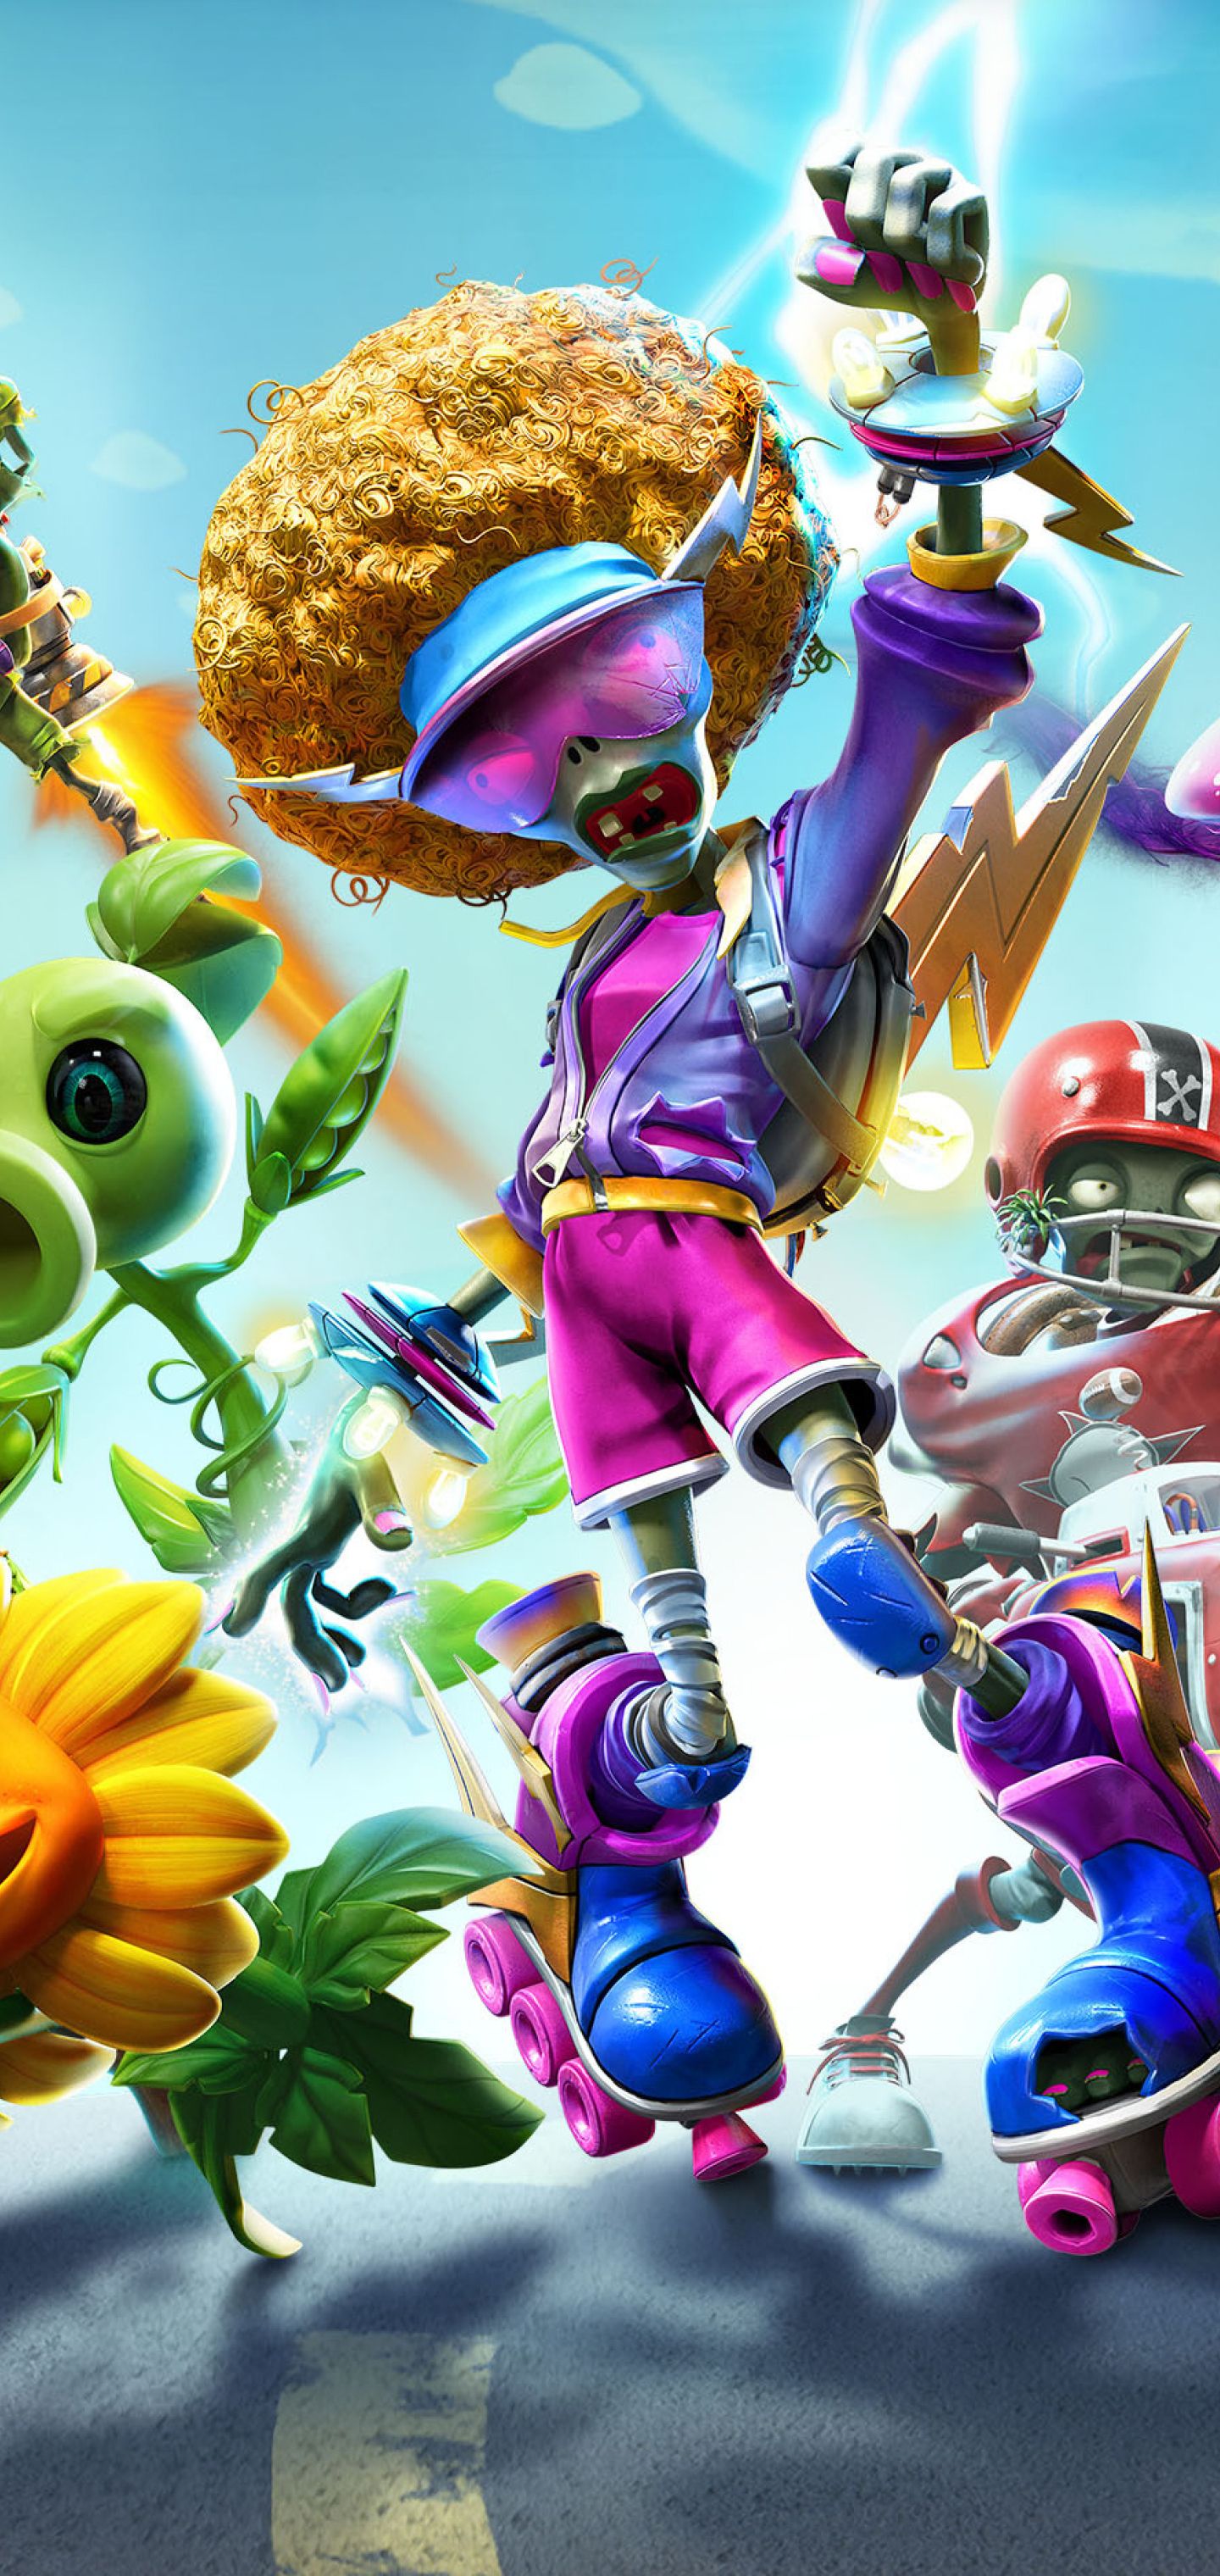 Plants Vs Zombies Battle For Neighborville 1440x3040 Resolution Wallpaper, HD Games 4K Wallpaper, Image, Photo and Background